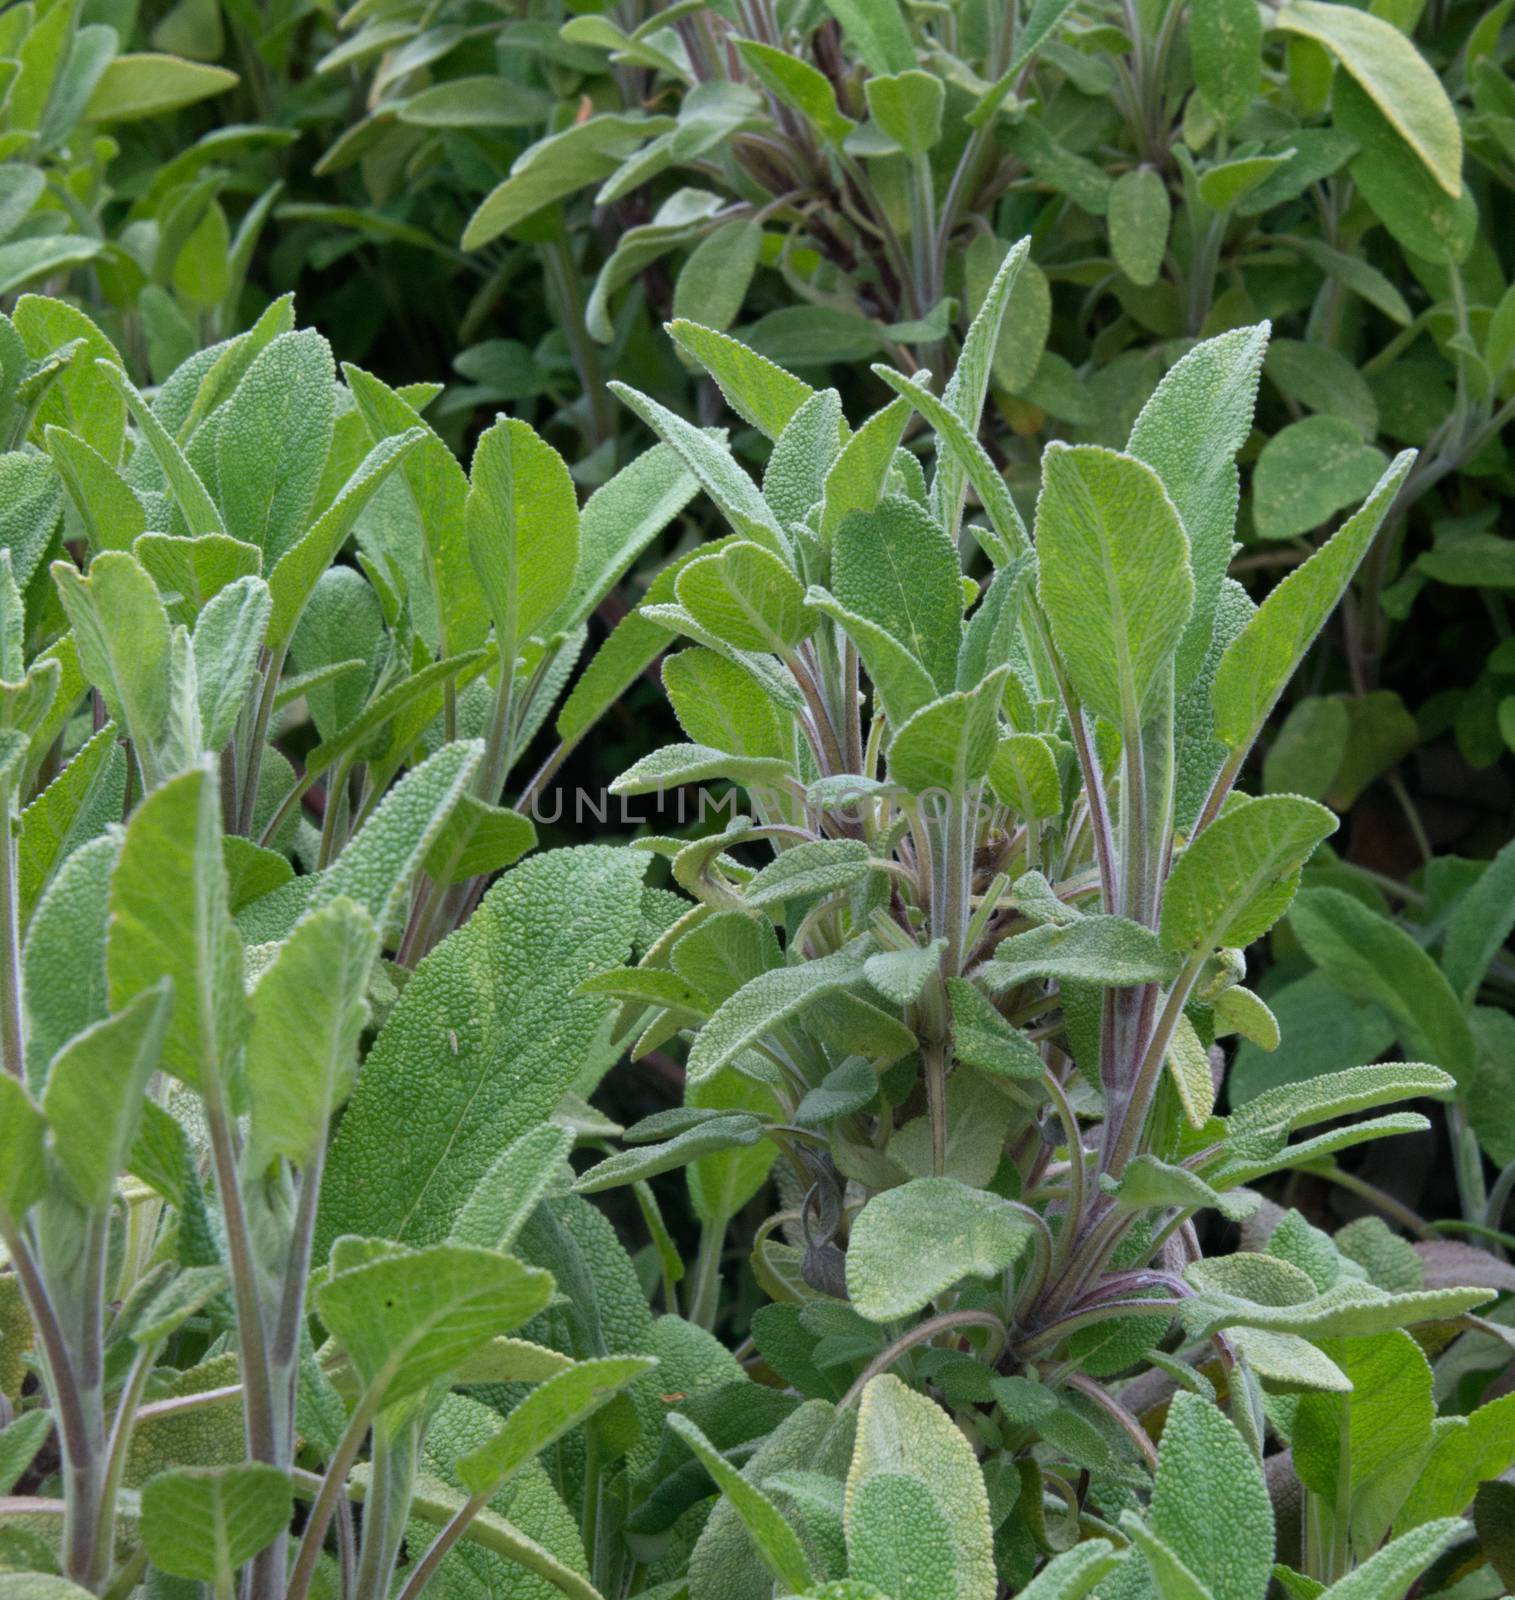 Sage plant - culinary herb growing in a garden